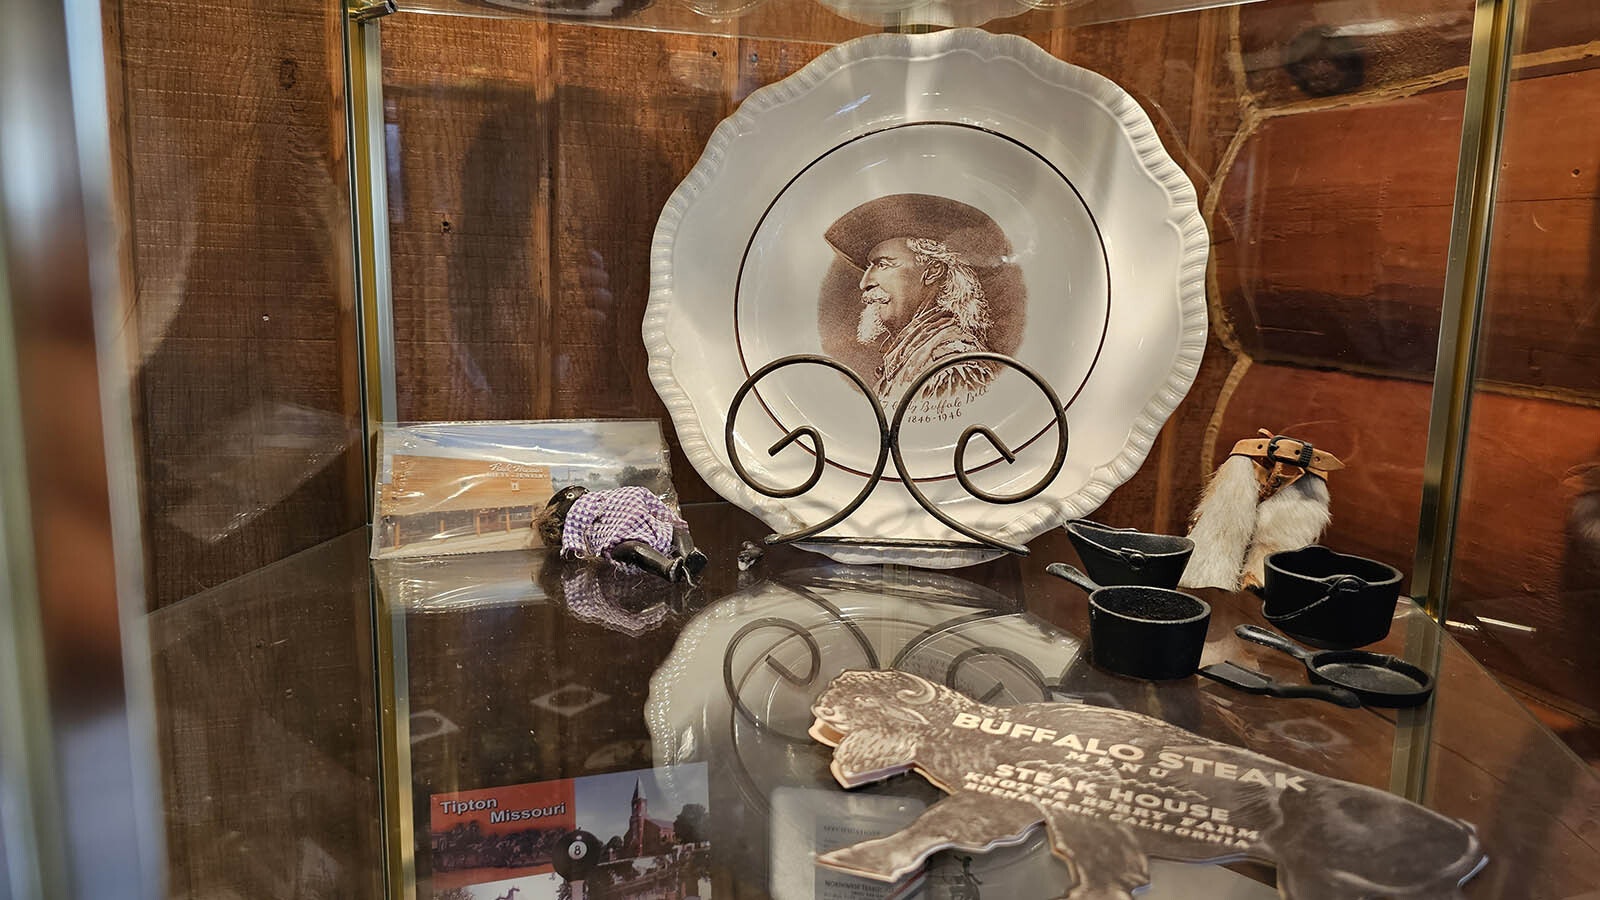 A plate with Buffalo Bill Cody, and an original 1898 program for his Wild West Show.